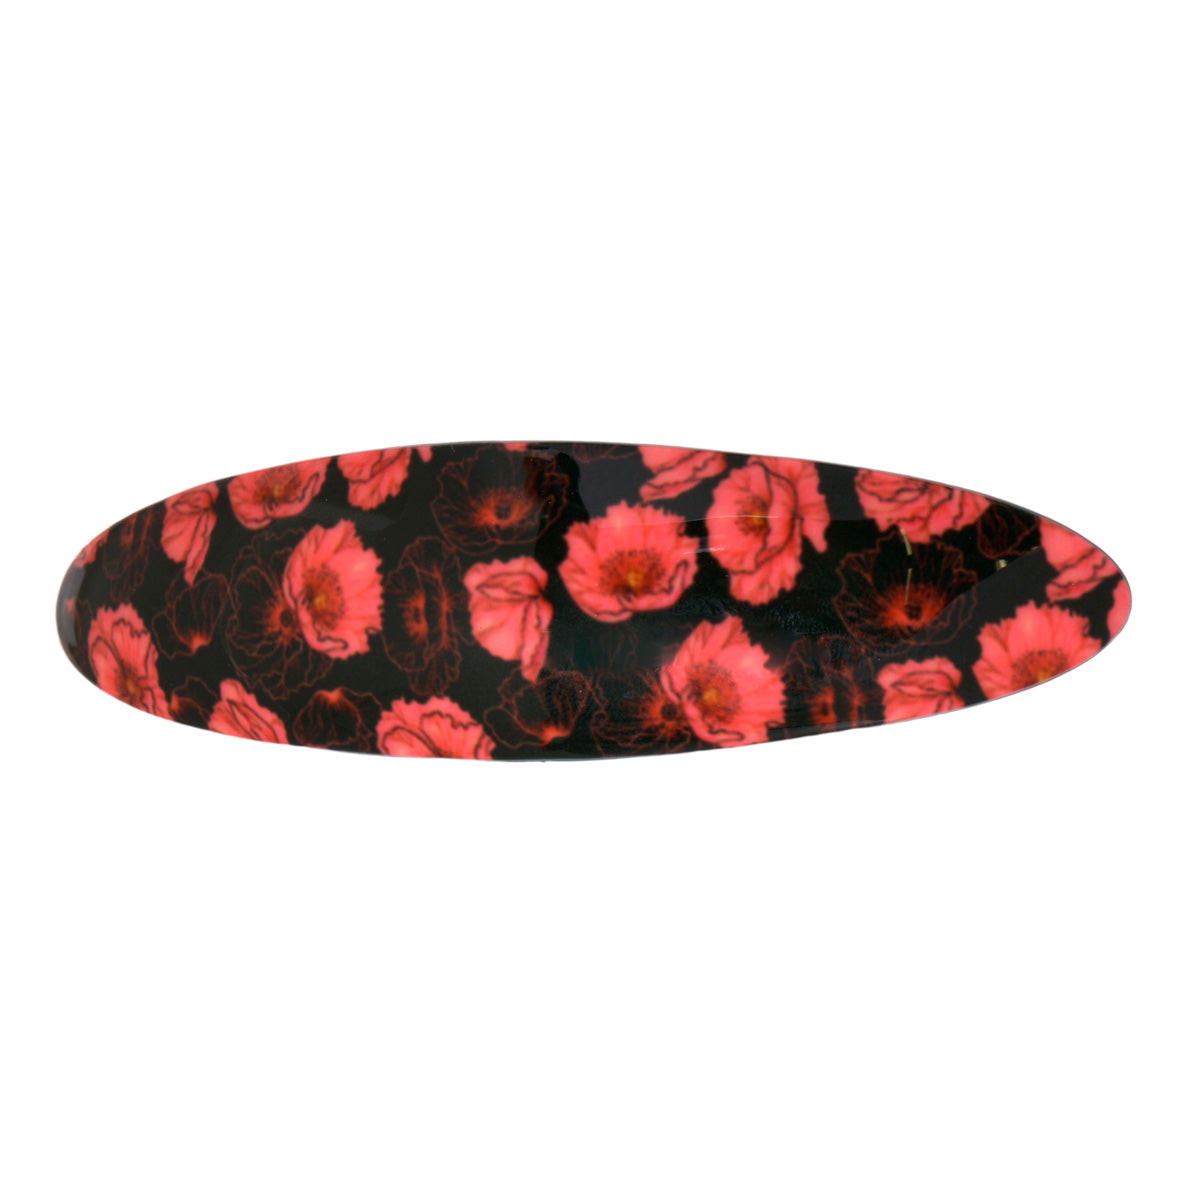 A colorful flower with a hair buckle 1pcs